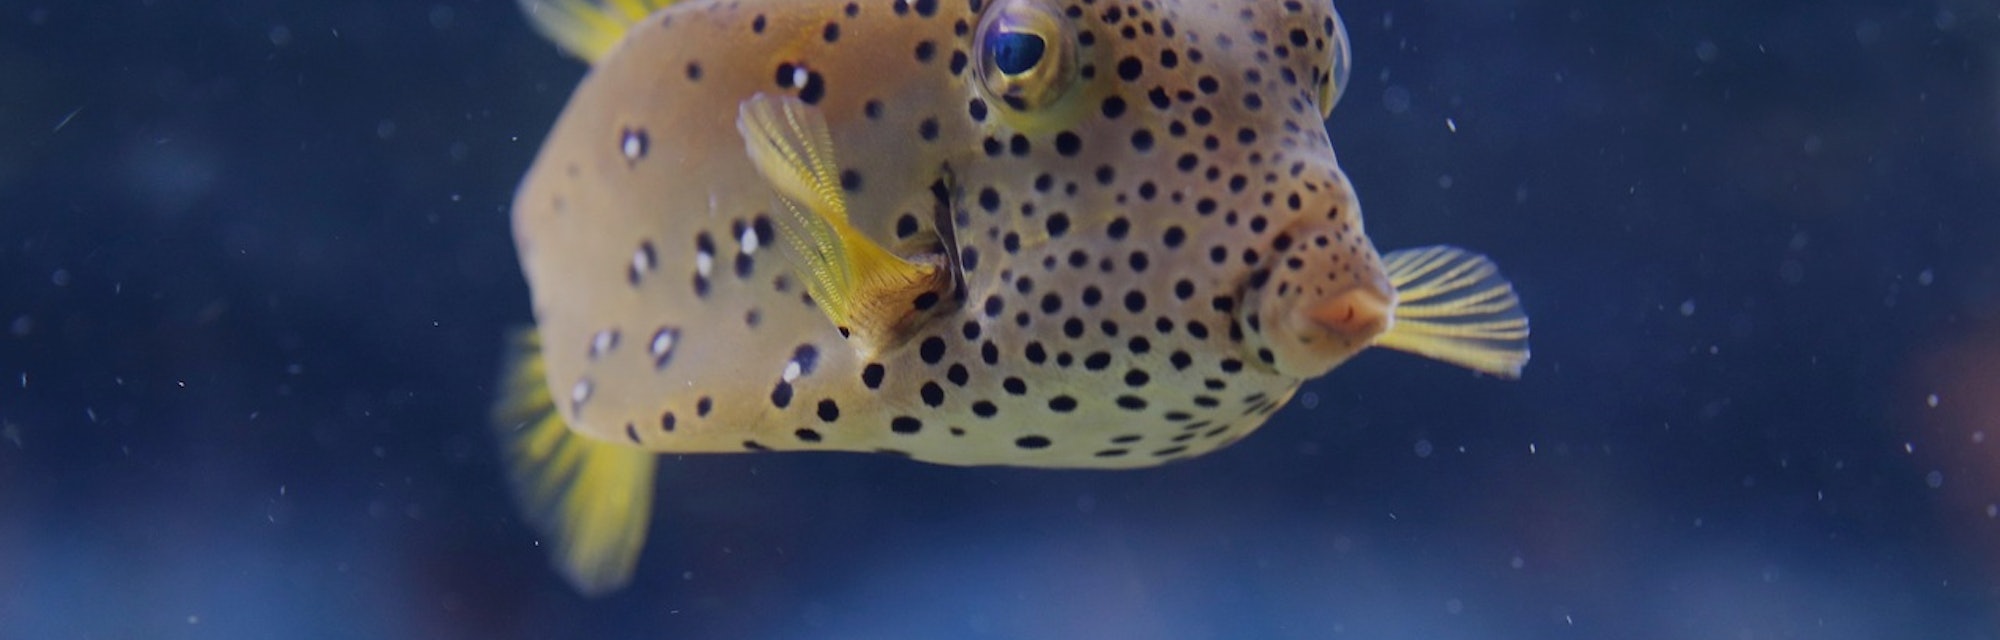 A Deadly Pufferfish Poison Can Be Harnessed To Block Pain Signals